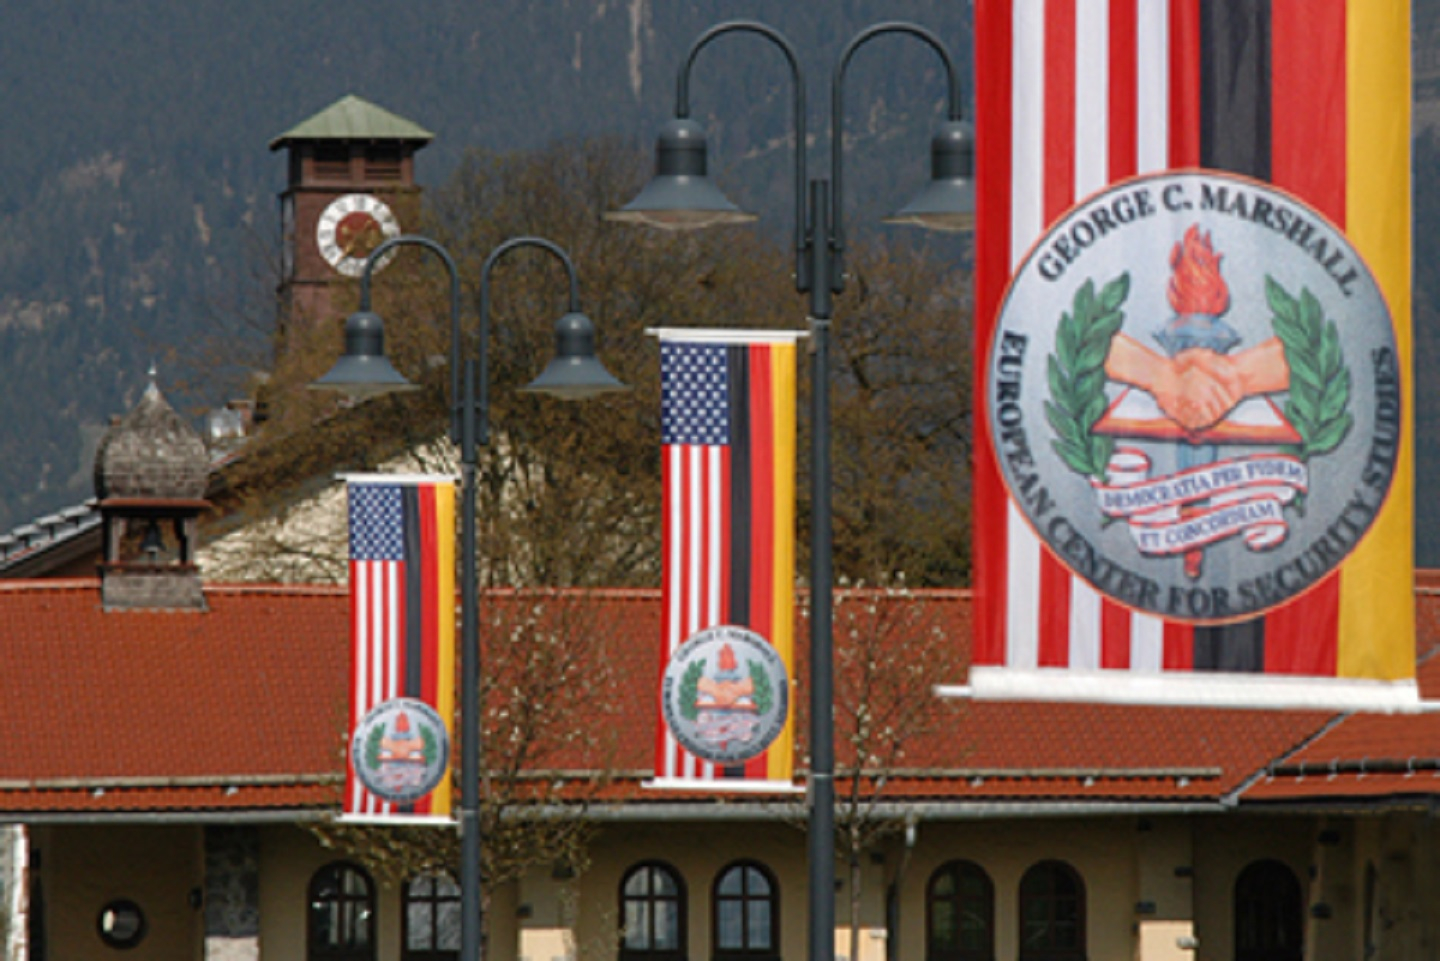 A photograph of American and German banners along the road side at the George C. Marshall Center European Center for Security Studies.